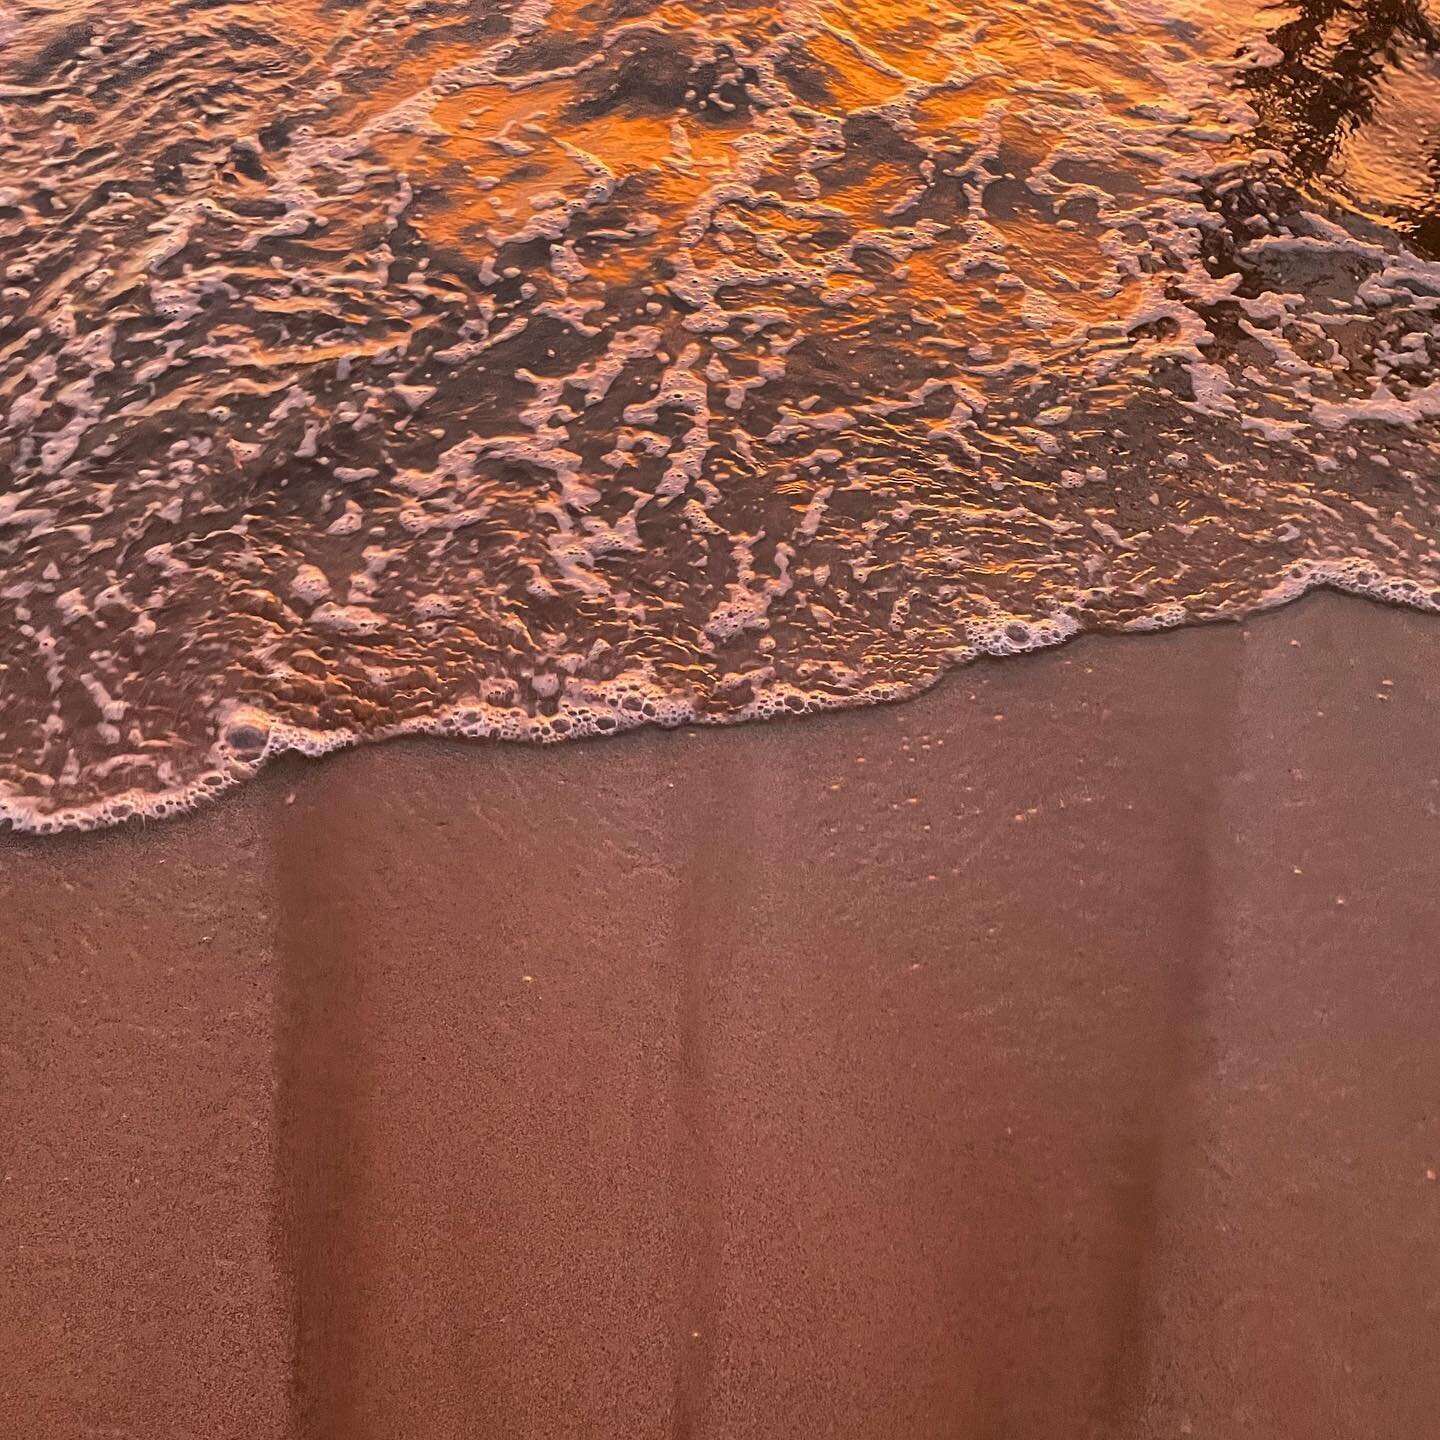 Water and sand at sunset